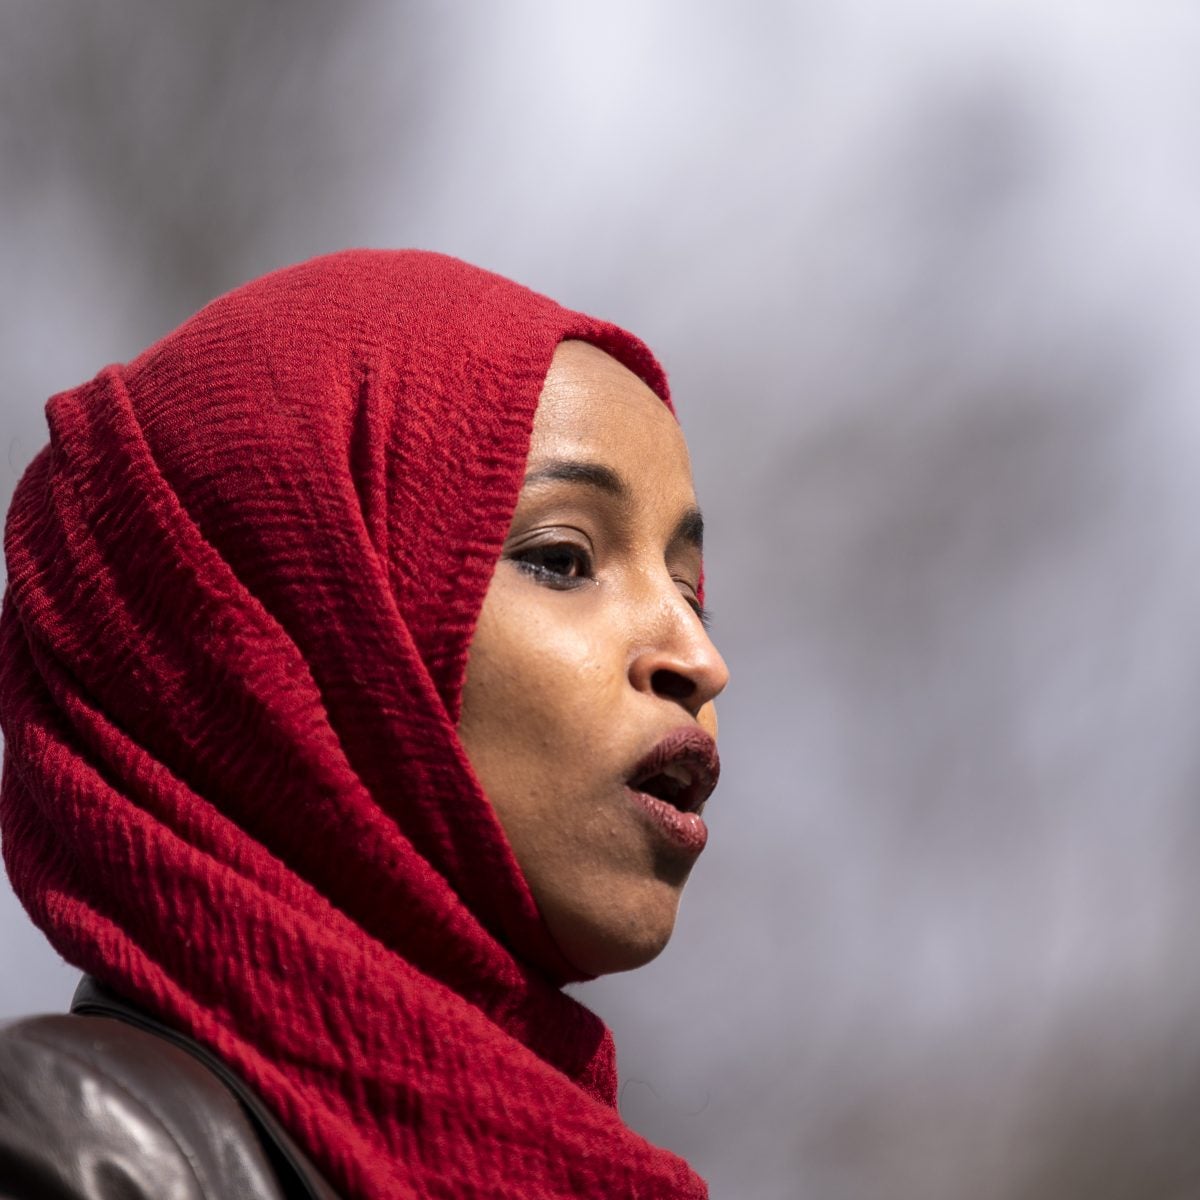 Rep. Ilhan Omar Speaks Out Against U.S., Israel Human Rights Violations, Faces Backlash